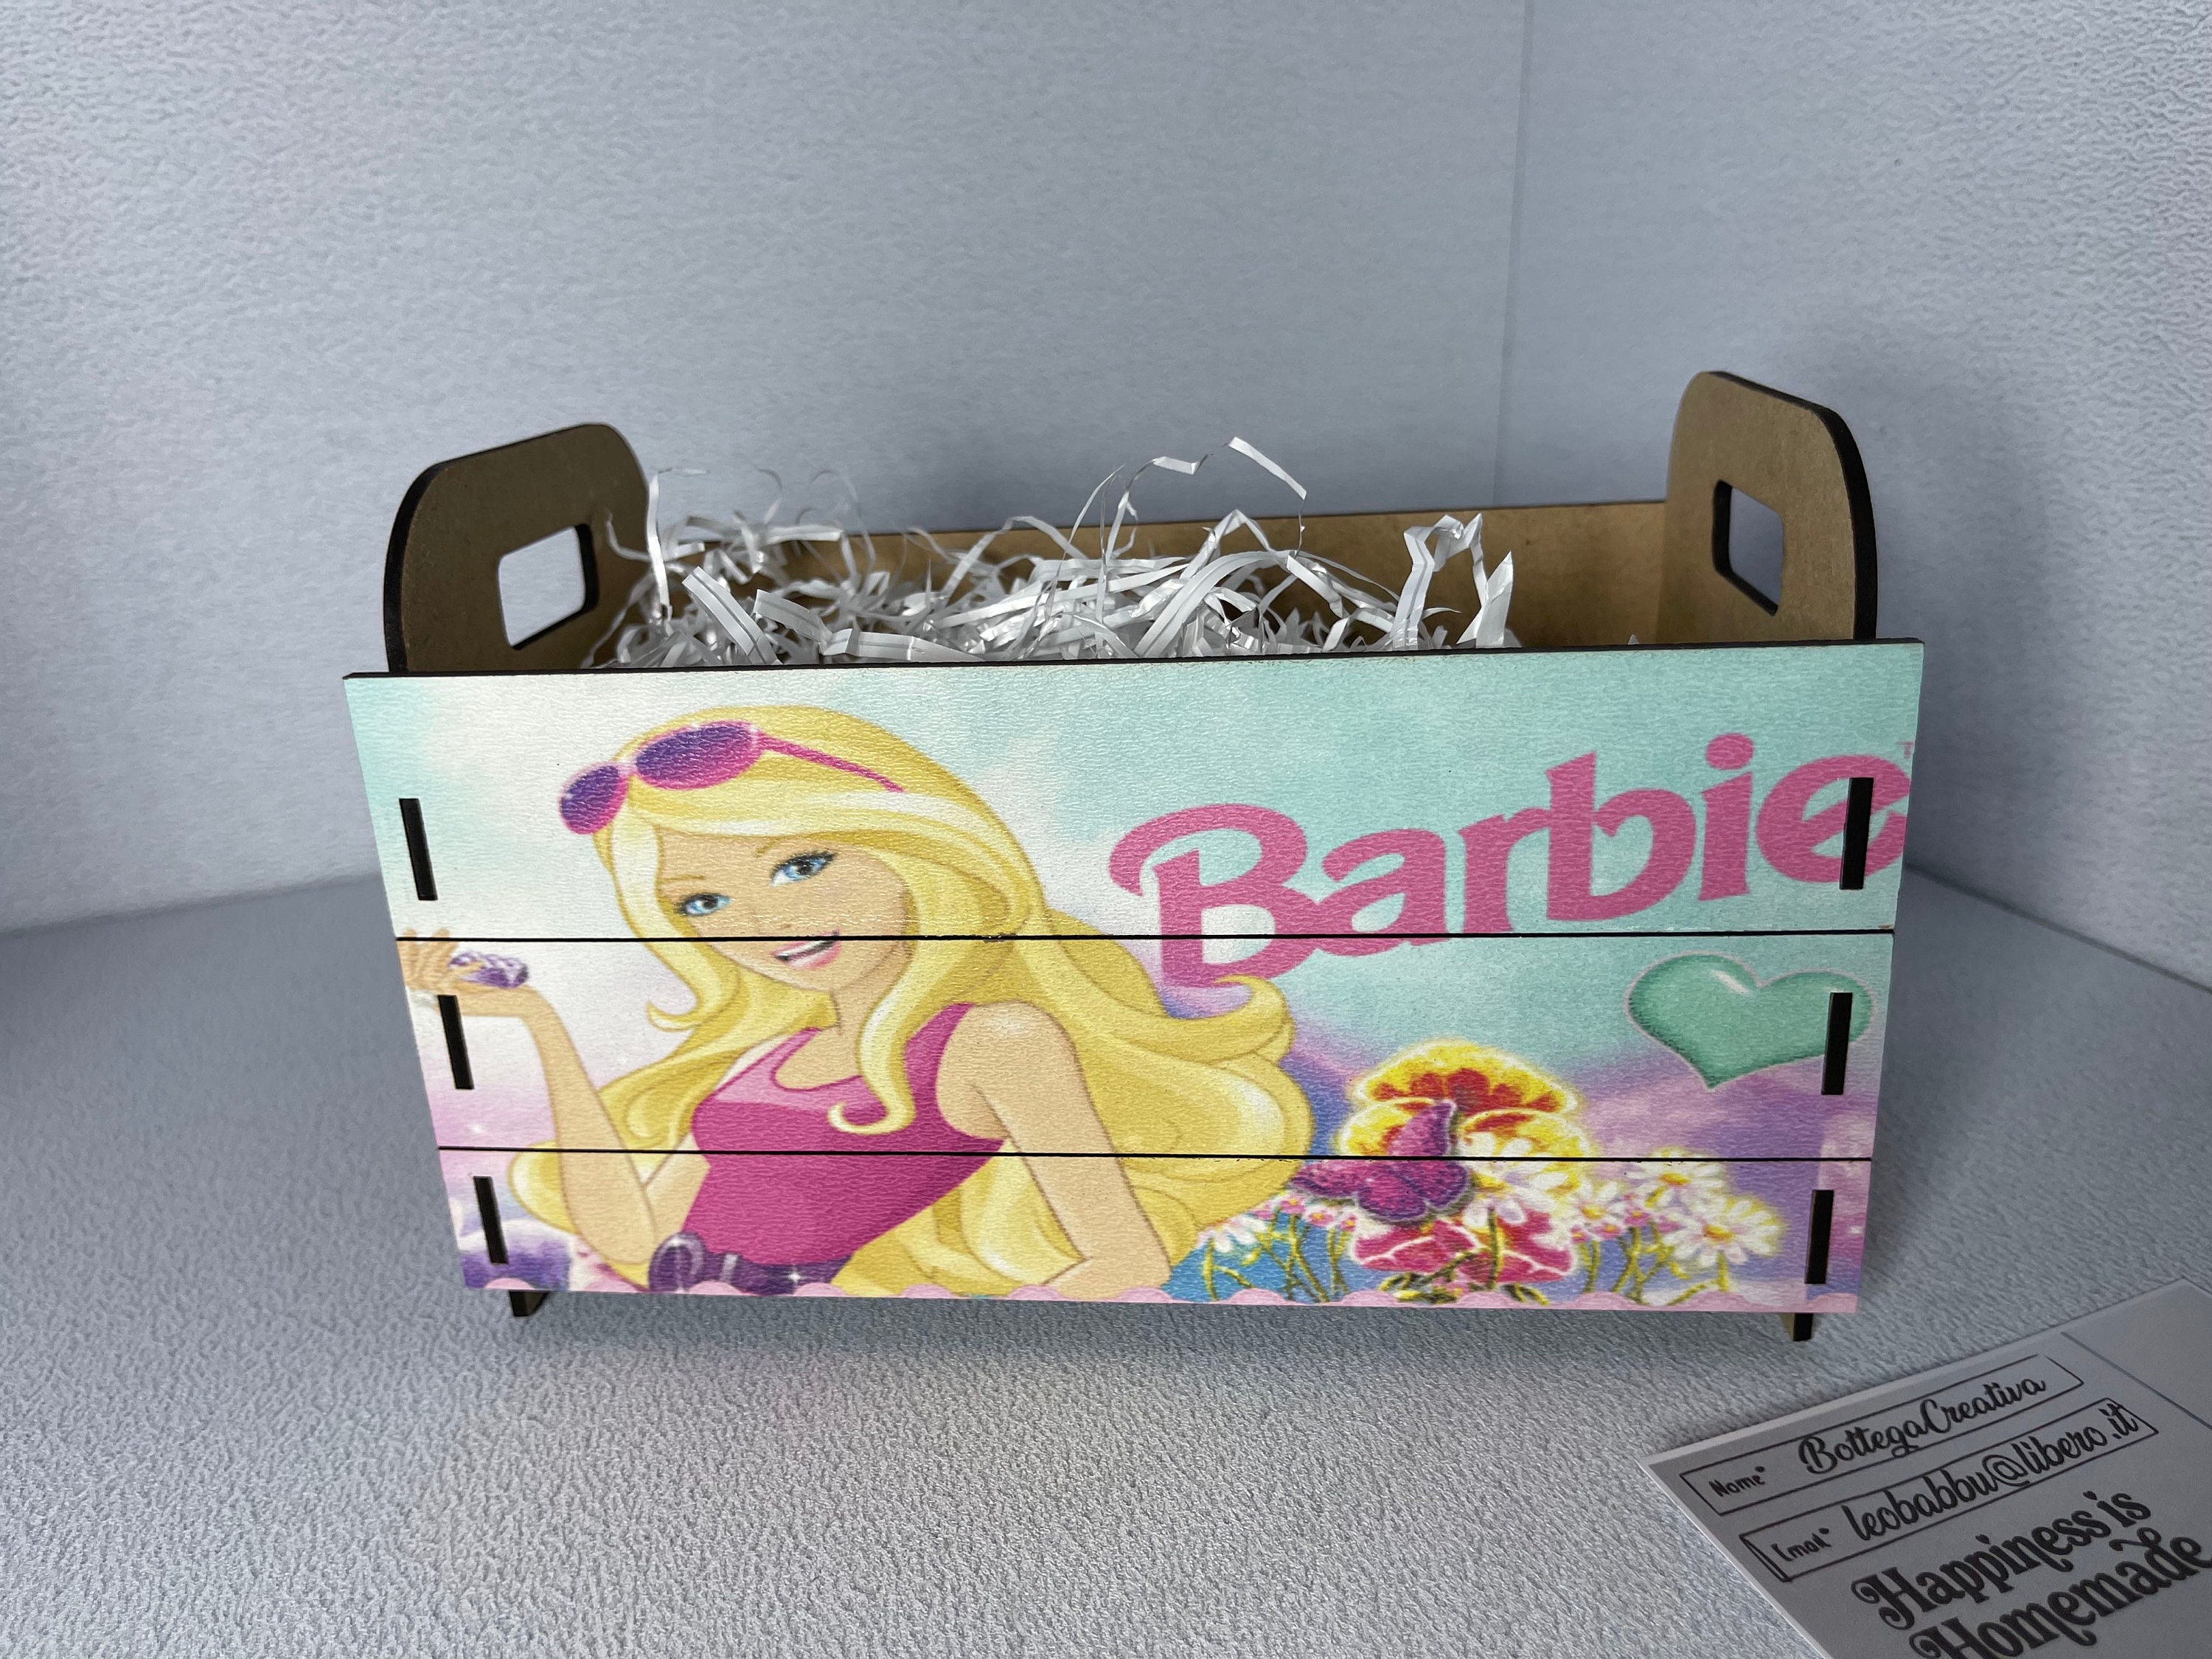 Personalized Barbie Accessory Storage Box, Barbie Dreamhouse organization,  Double sided and a great gift for girls or Barbie collectors!